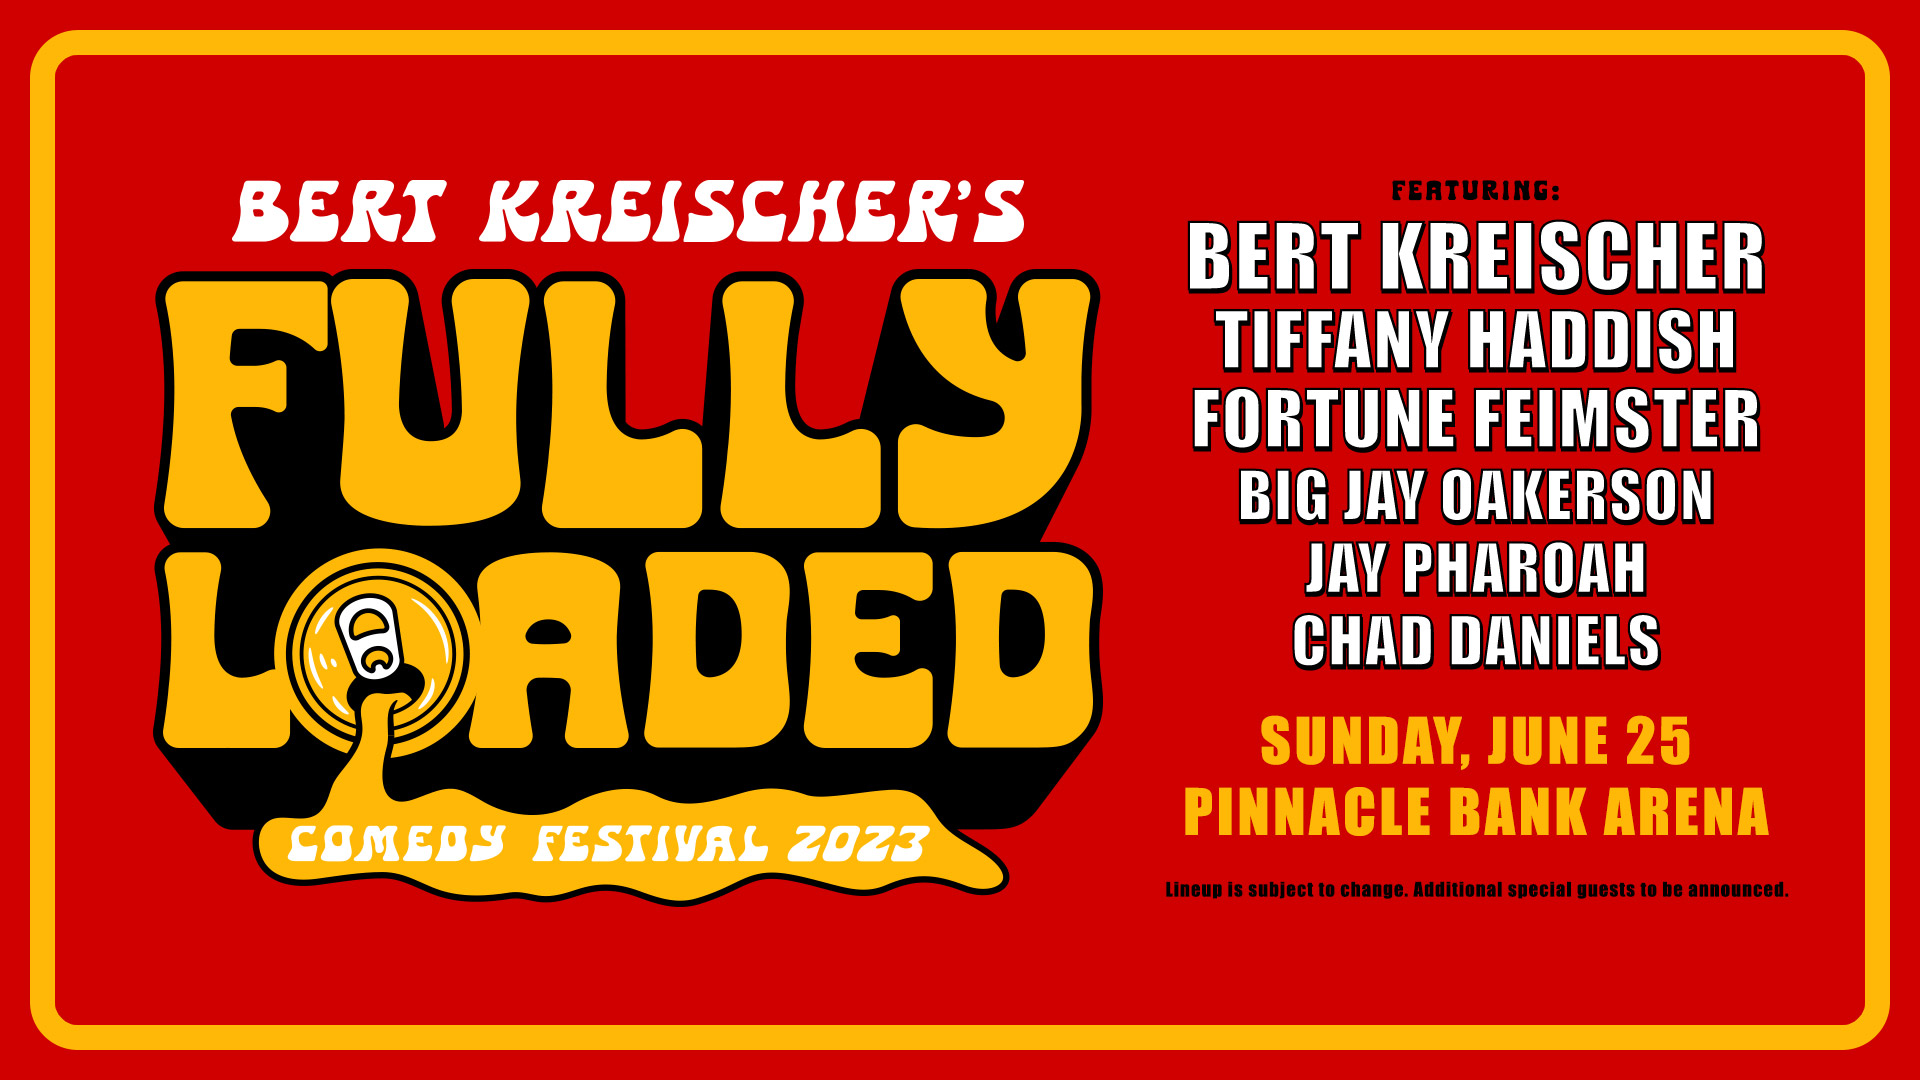 <h1 class="tribe-events-single-event-title">Bert Keischer’s Fully Loaded Comedy Festival</h1>